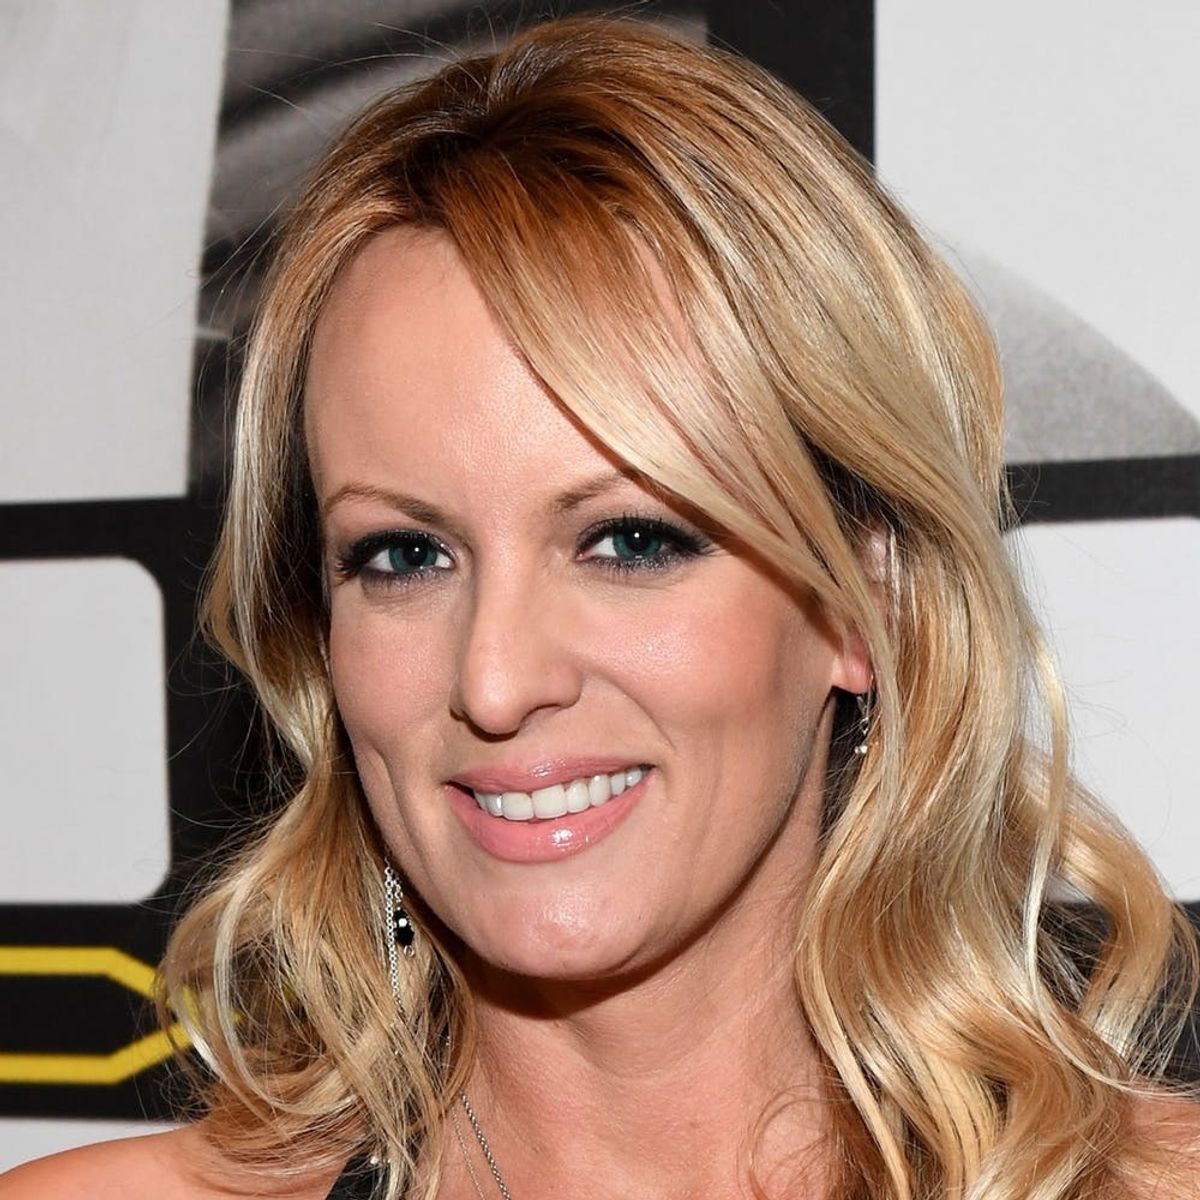 How We Talk About Stormy Daniels Matters More Than You May Think